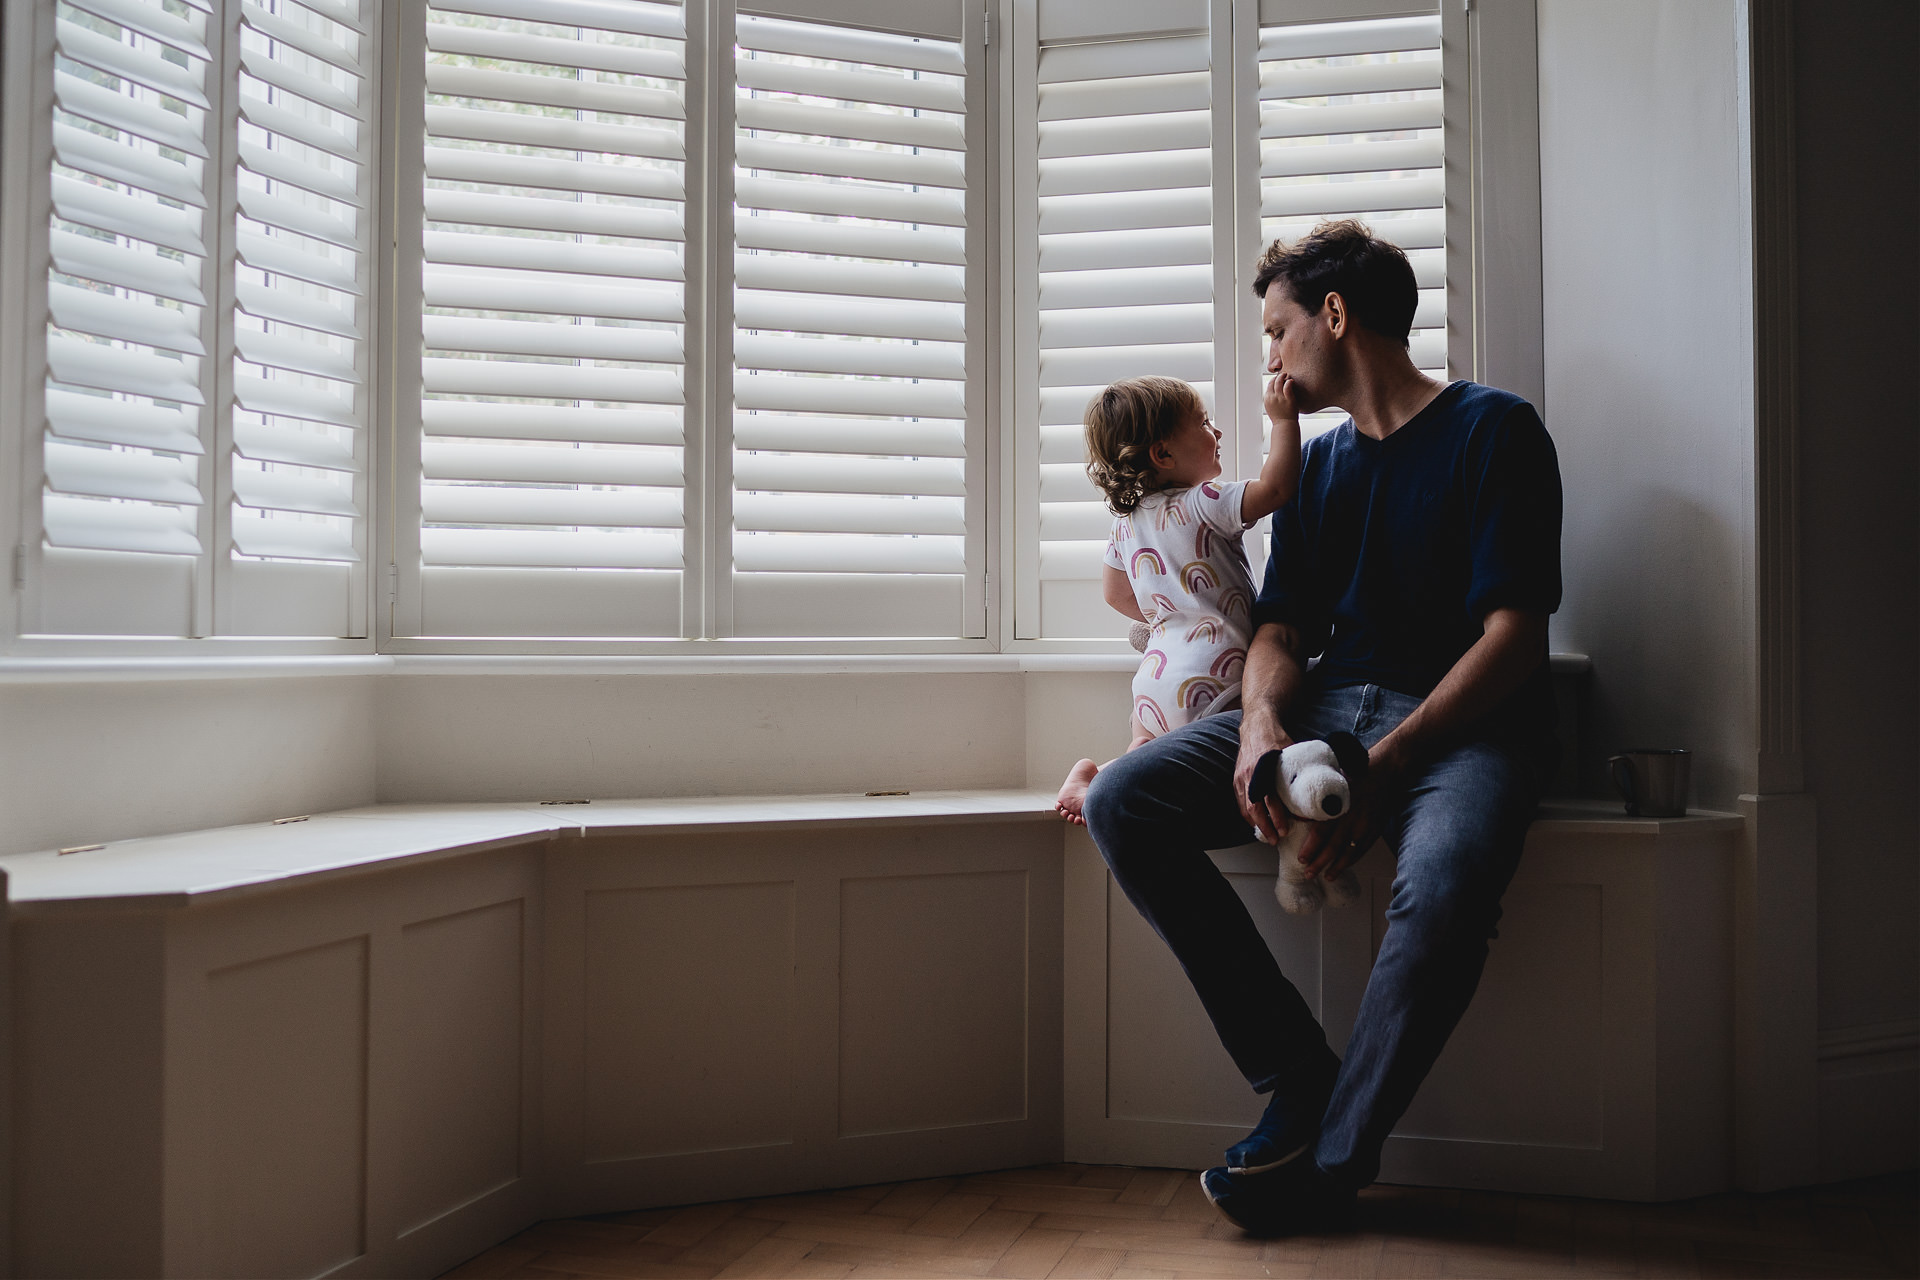 A father and daughter sitting on a window seat in front of shutters